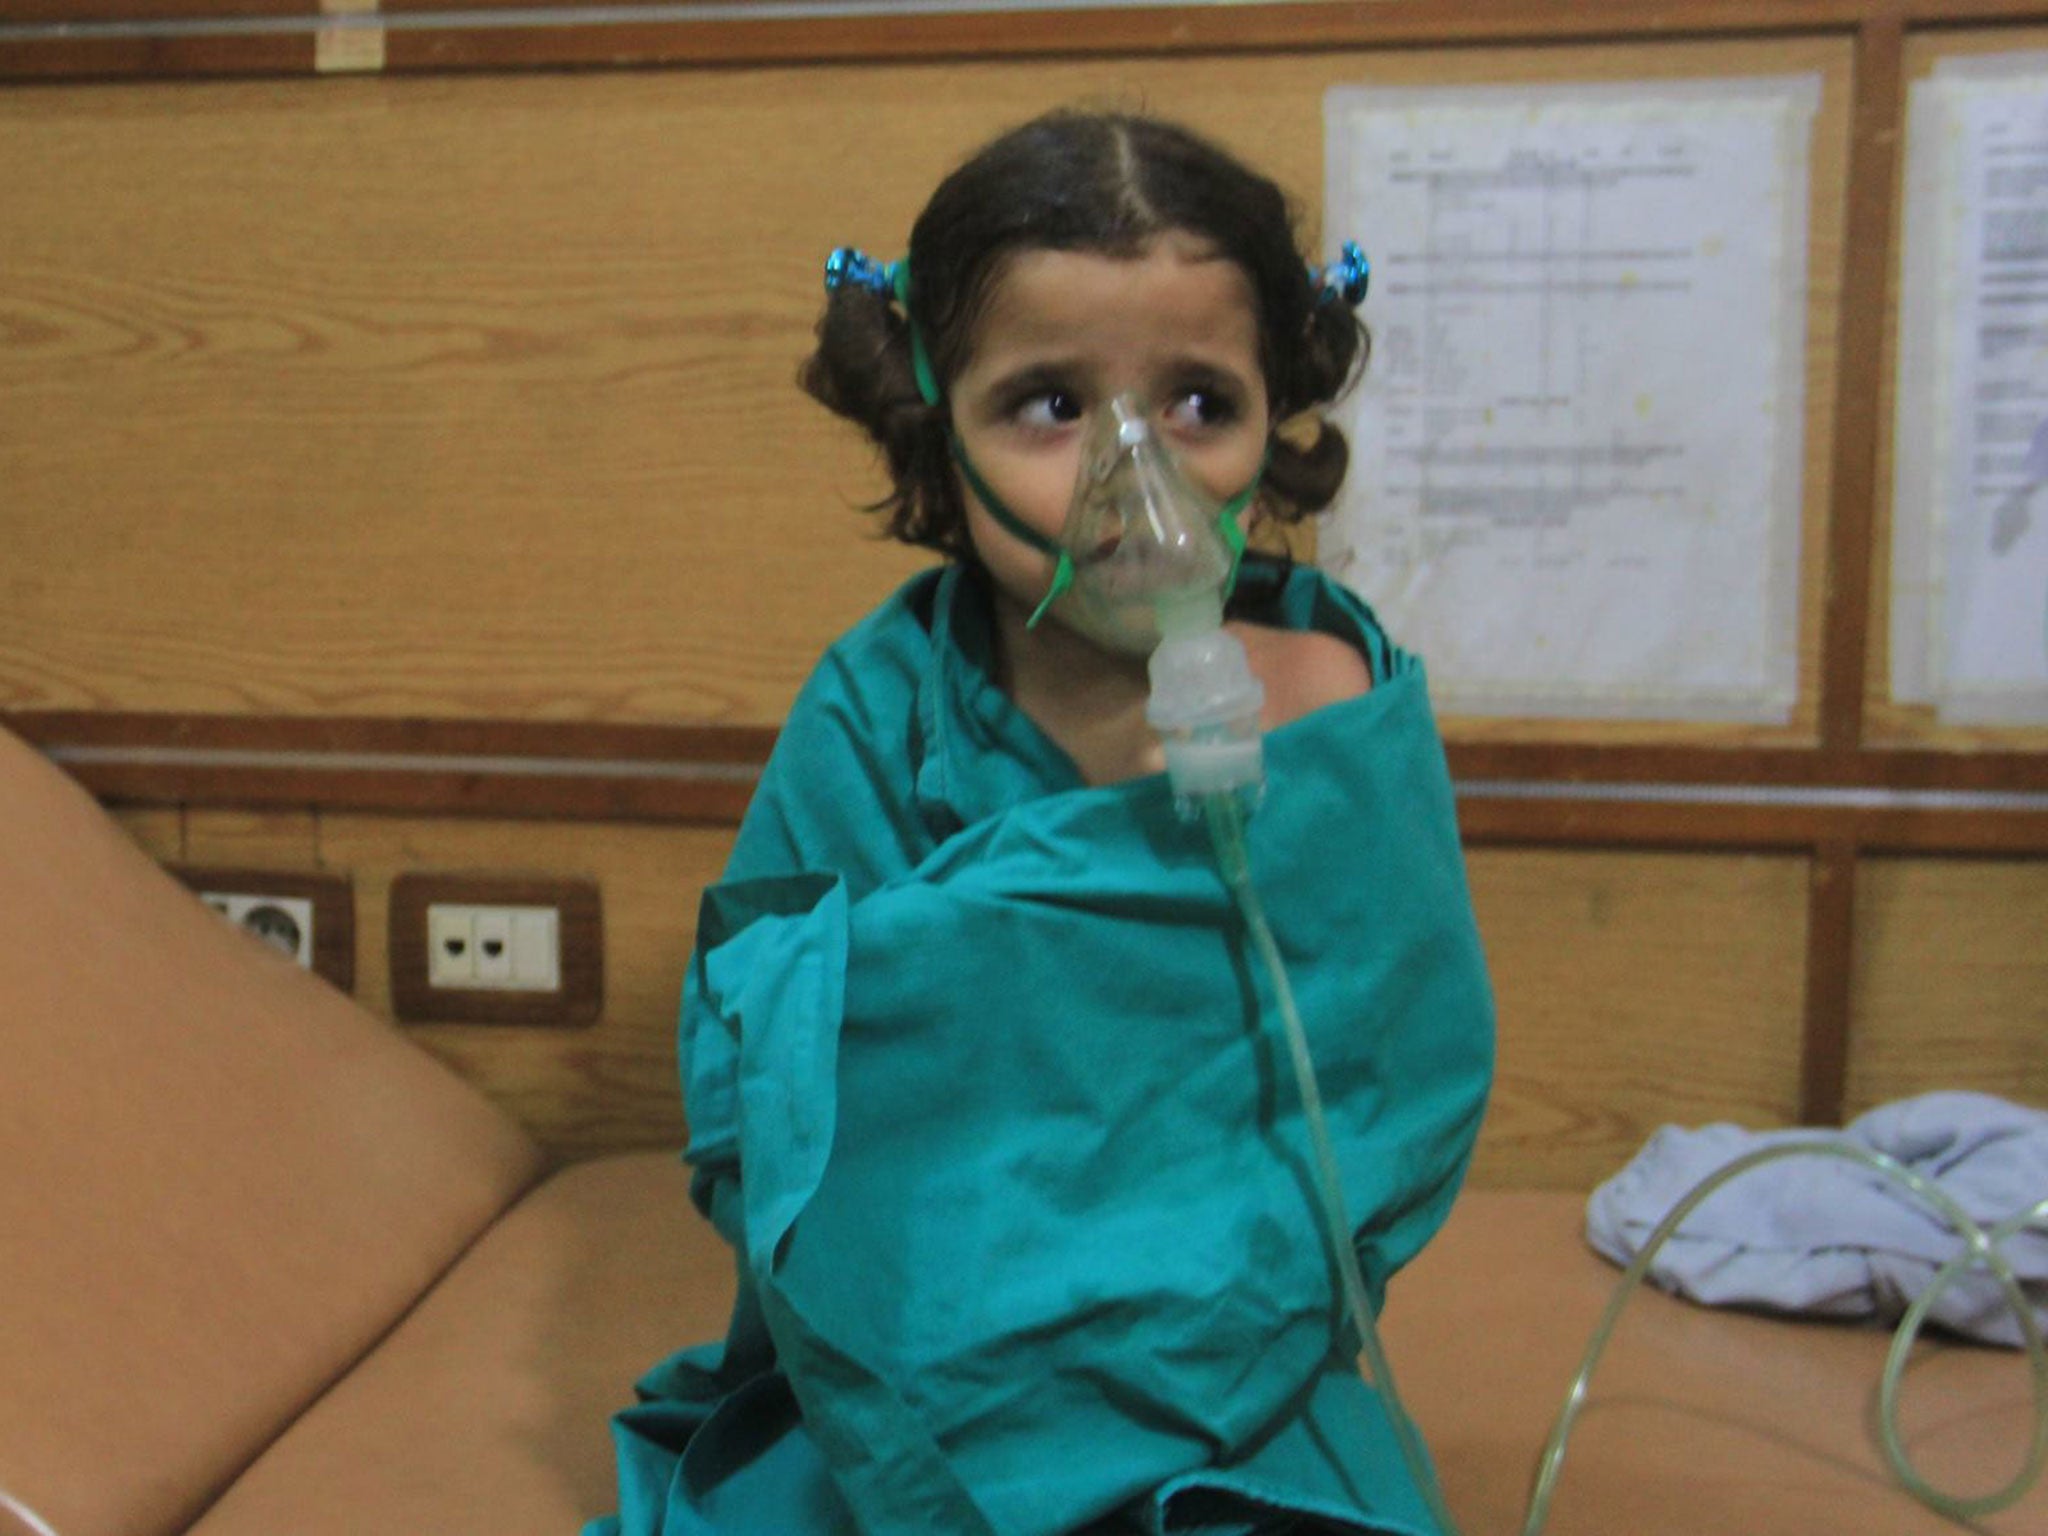 Children were given emergency treatment after a suspected gas attack in Aleppo last week